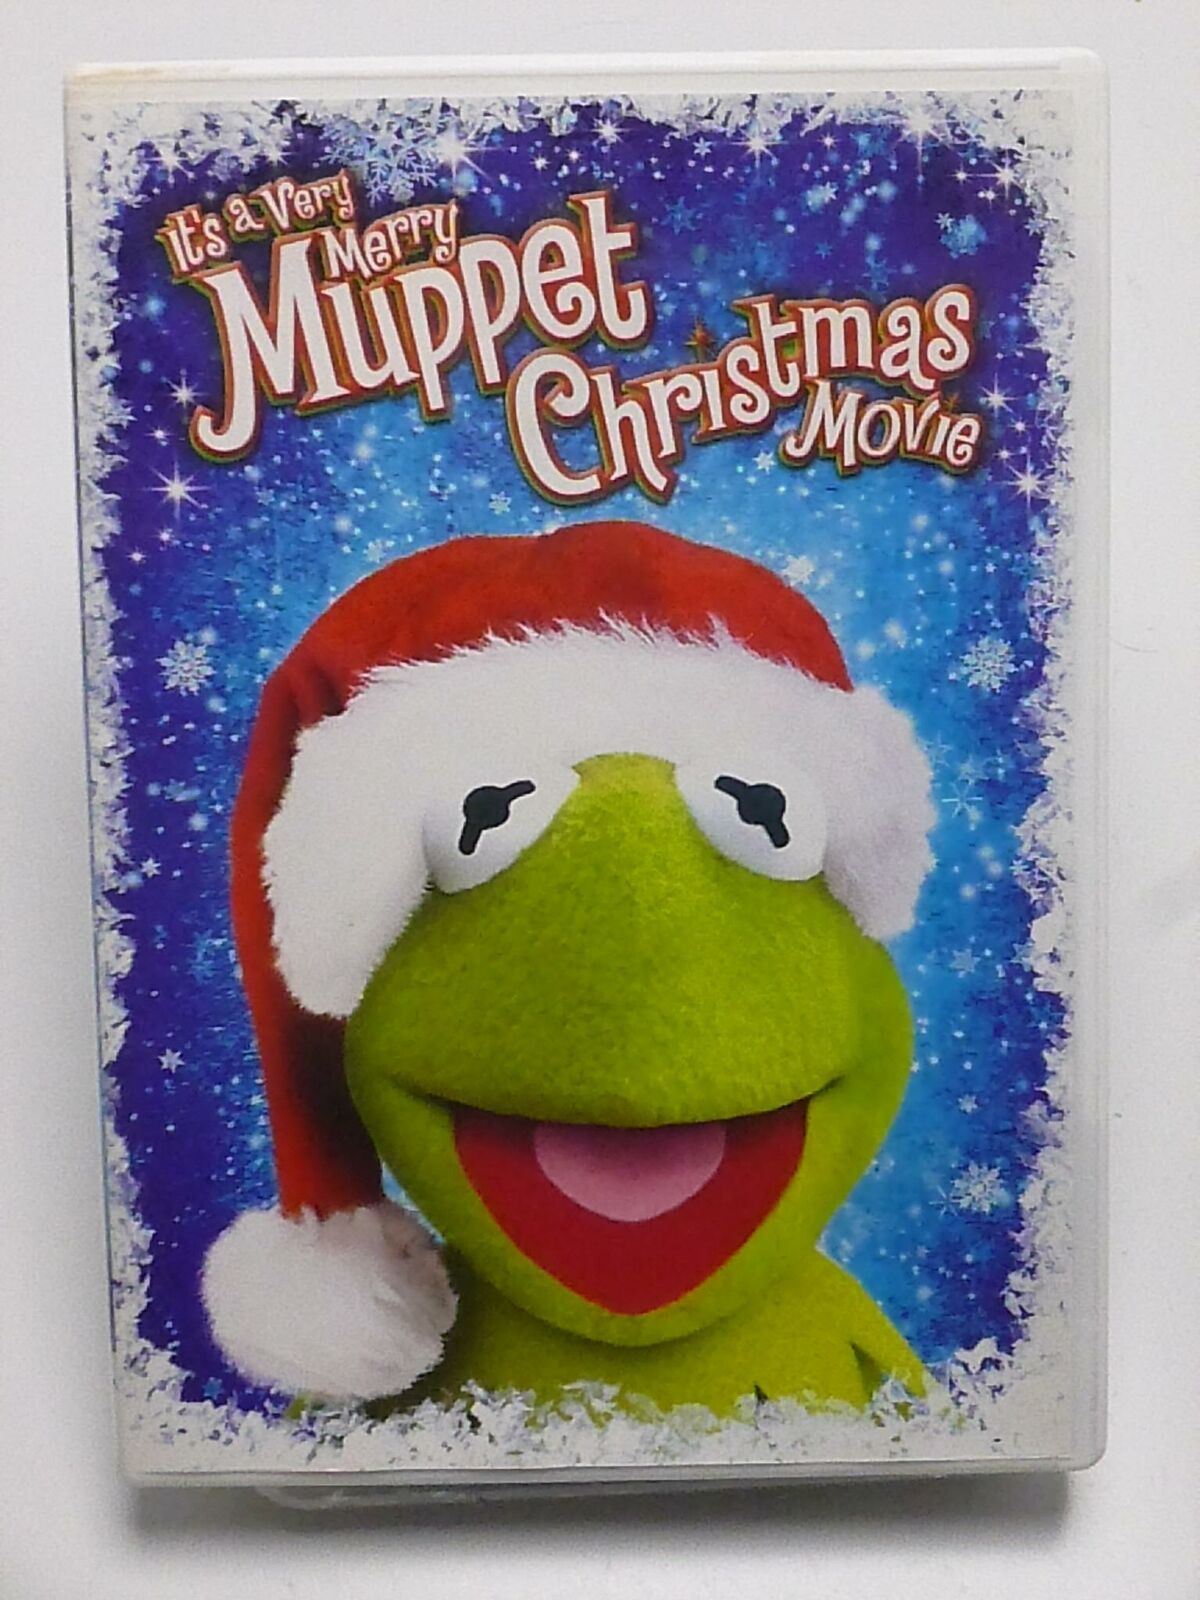 Its a Very Merry Muppet Christmas Movie (DVD, 2002) - I1106